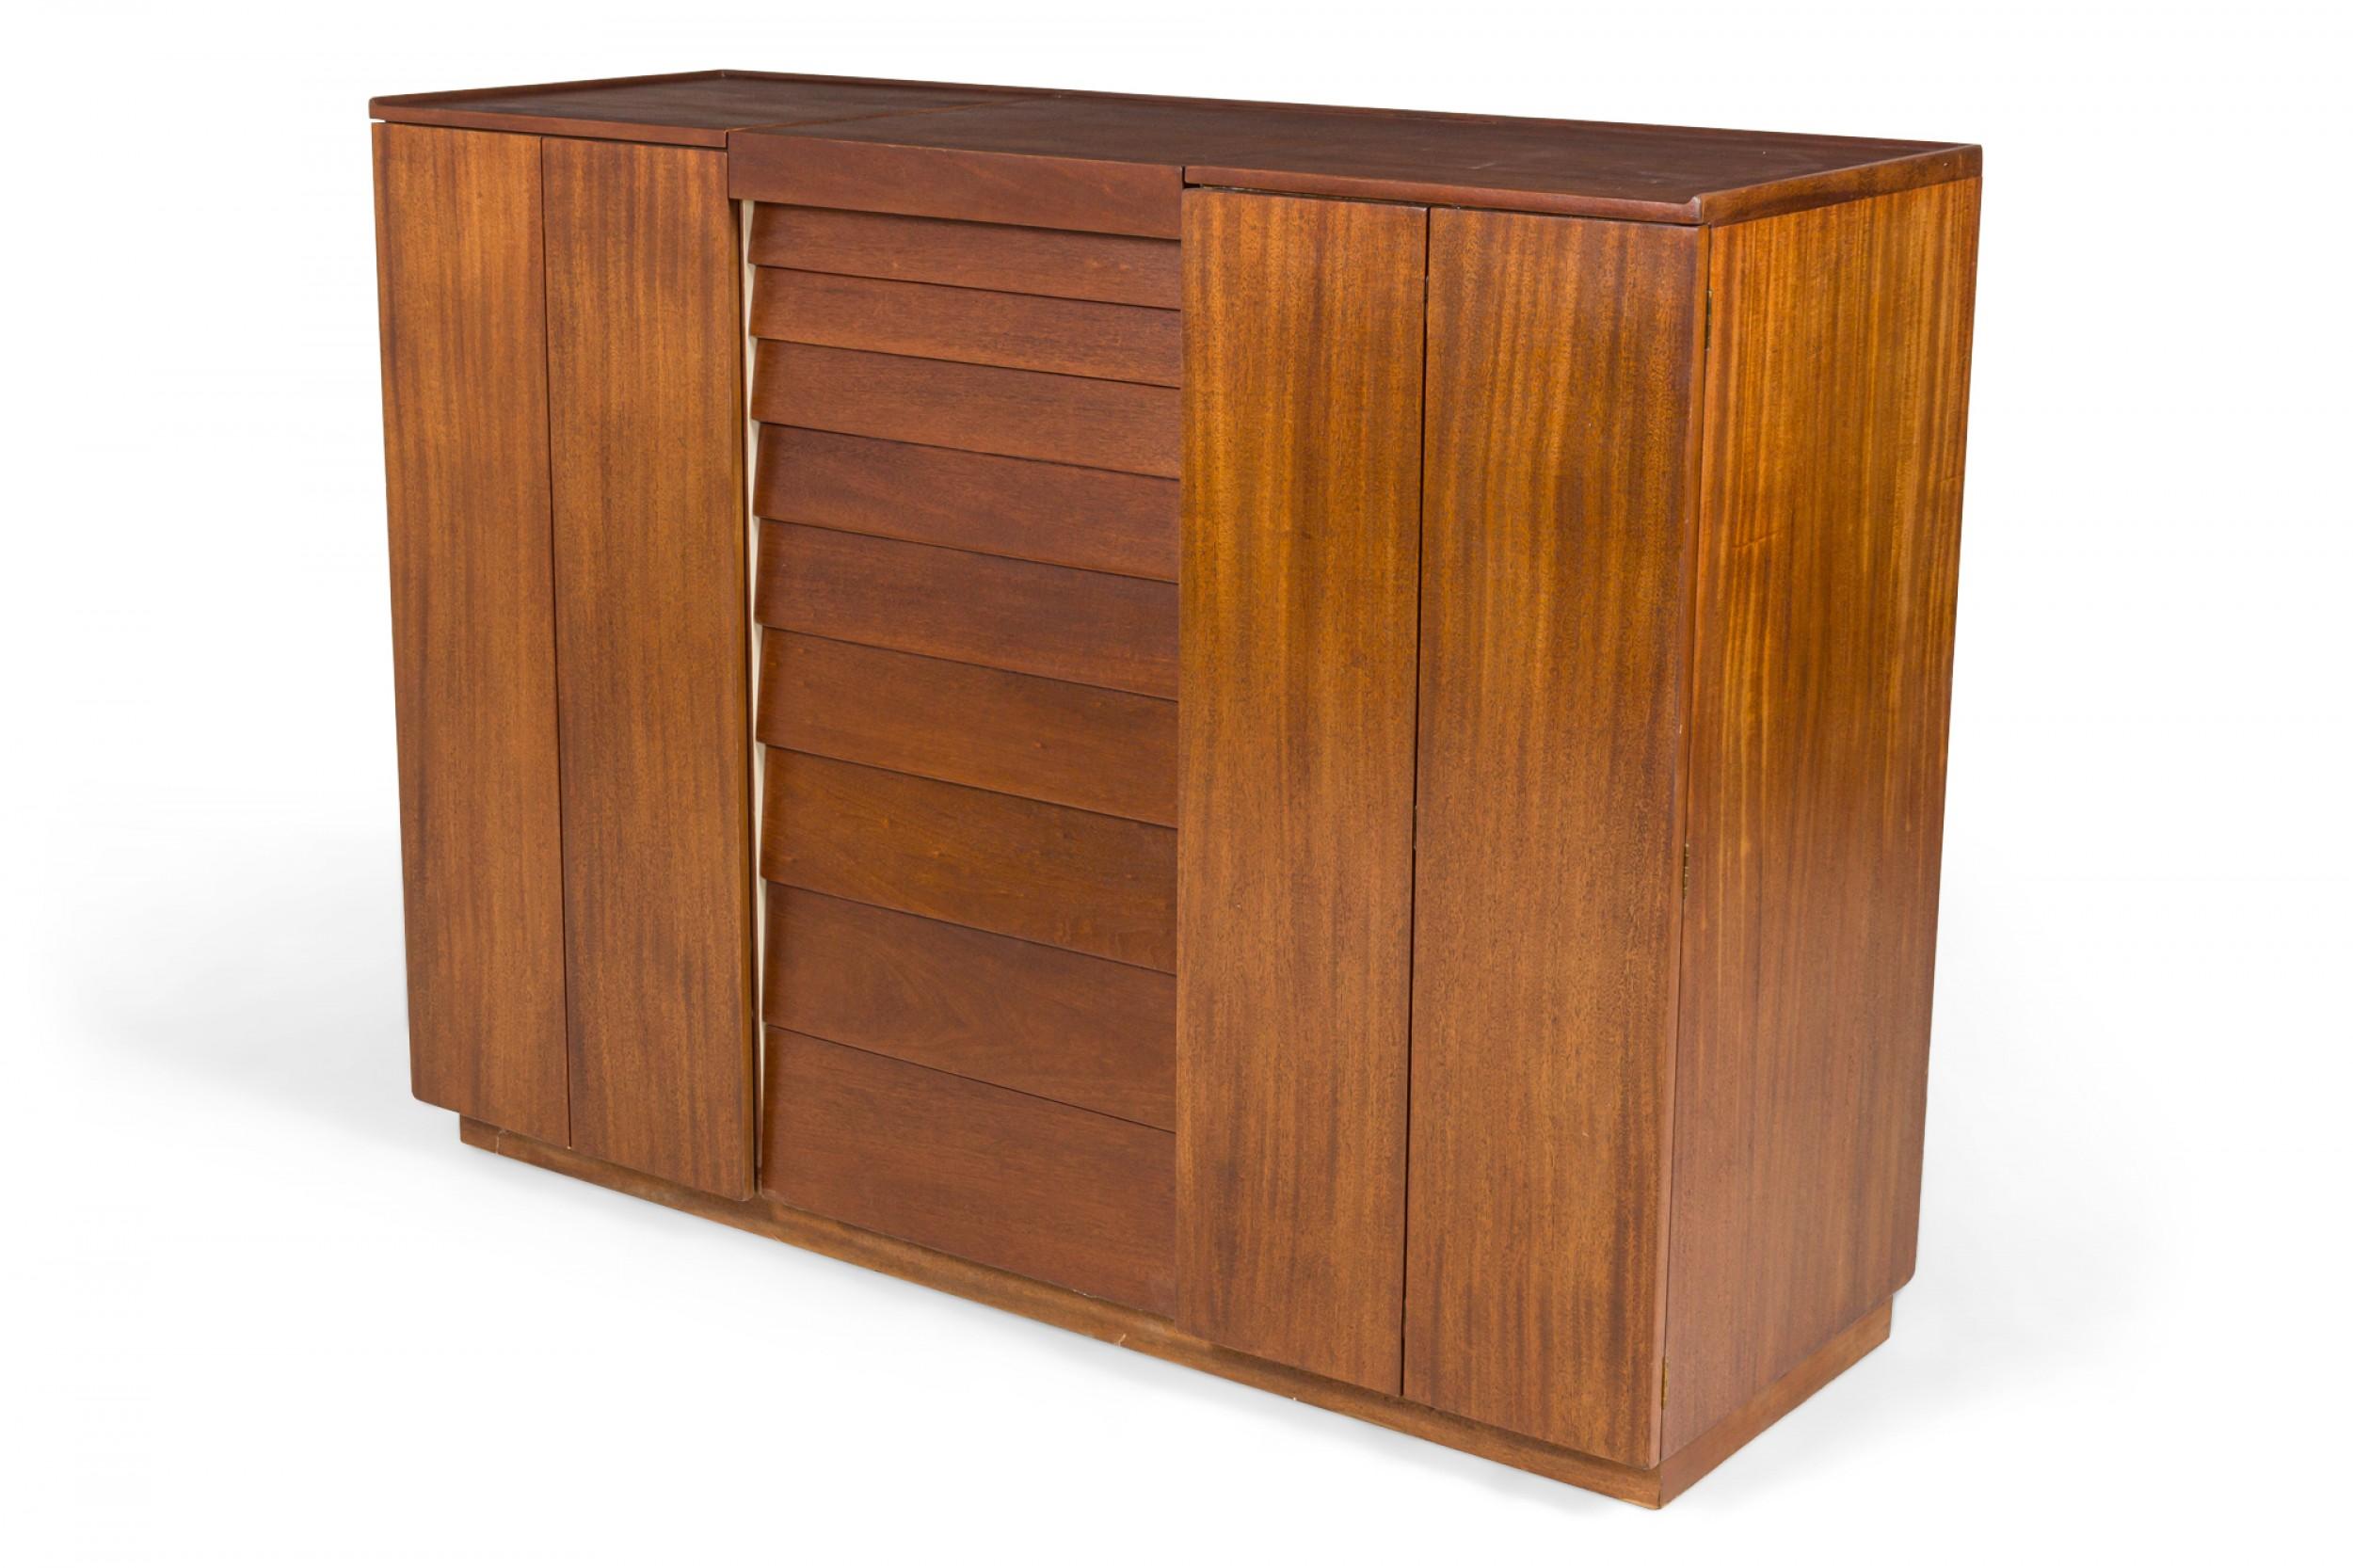 American Mid-Century walnut chifferobe / dressing cabinet with a central section with 9 drawers descending in size from top to bottom, flanked on either side by two door cabinets, with a central lid that opens upward to reveal a concealed mirror and